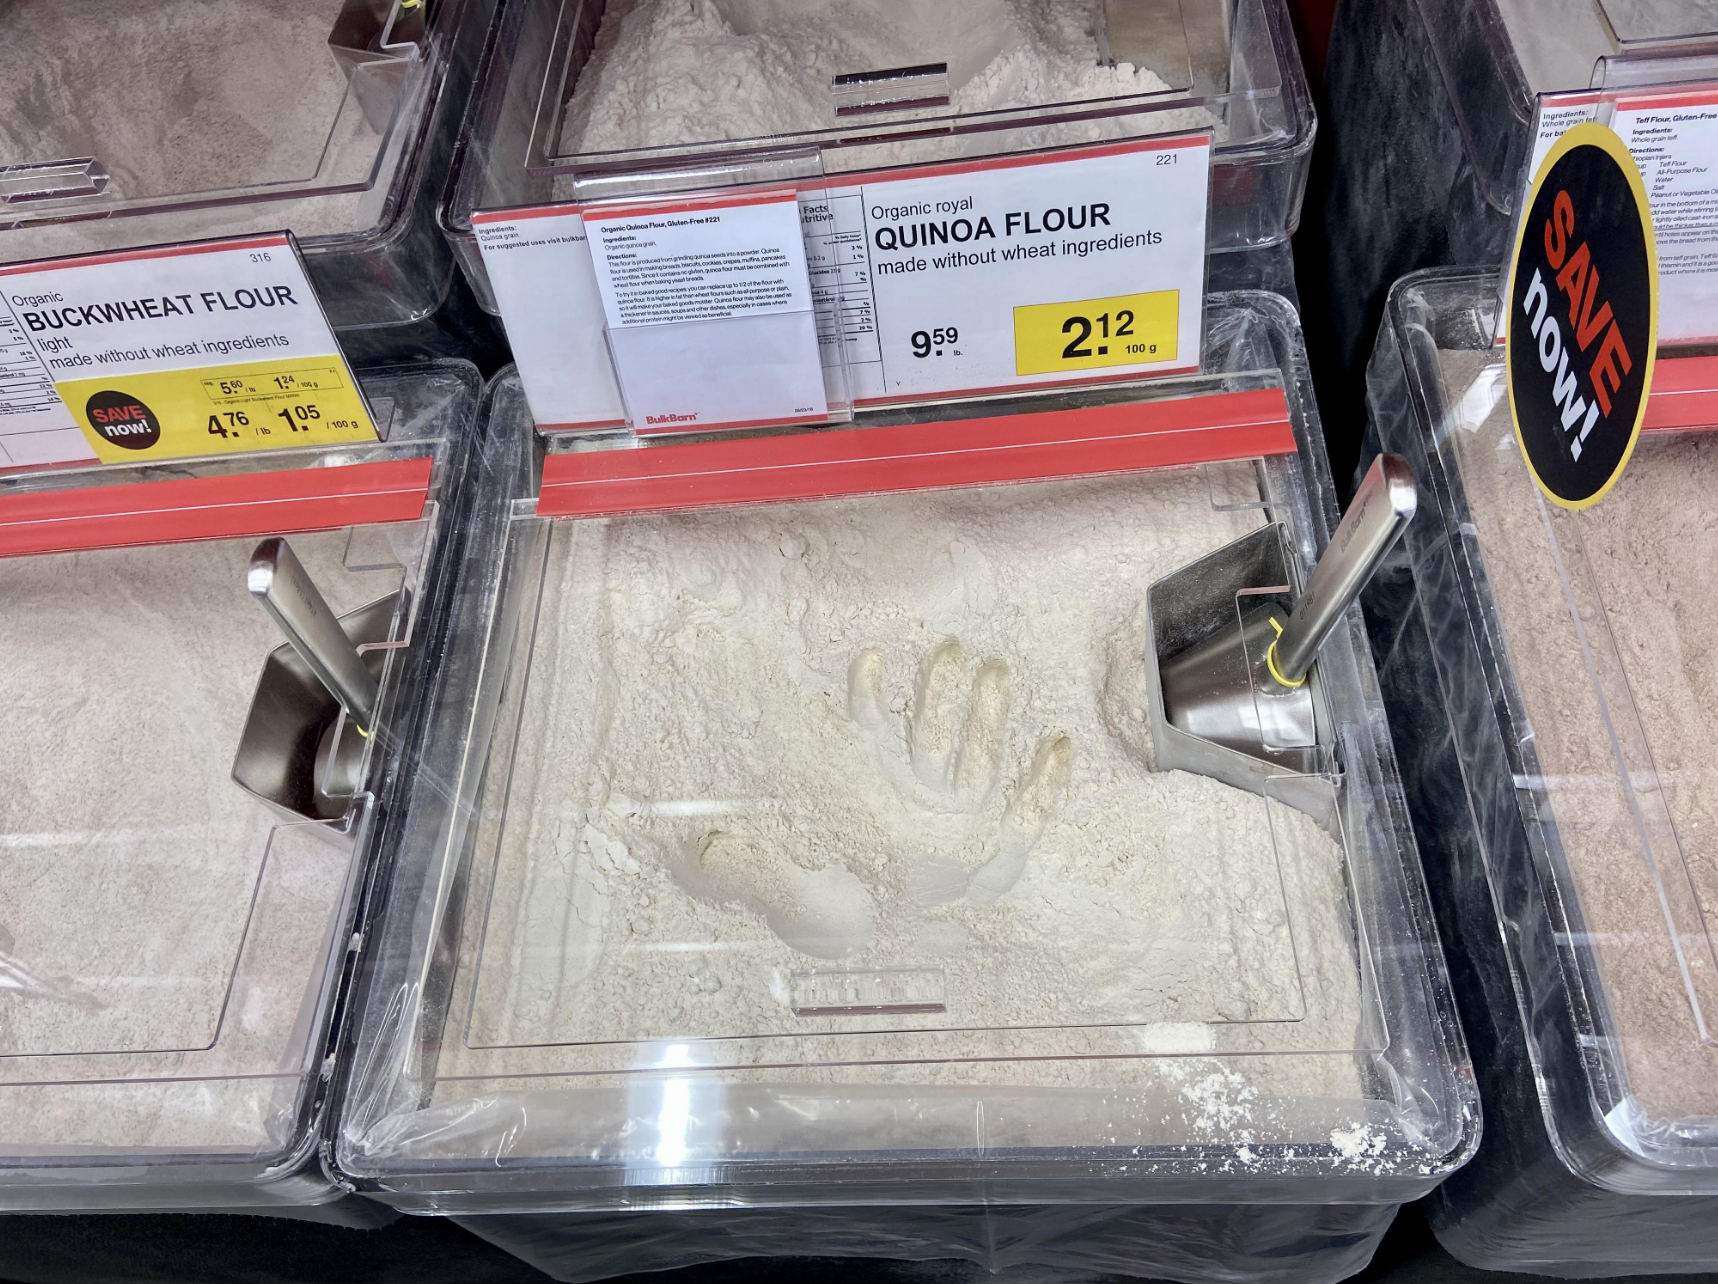 A hand print in some flour